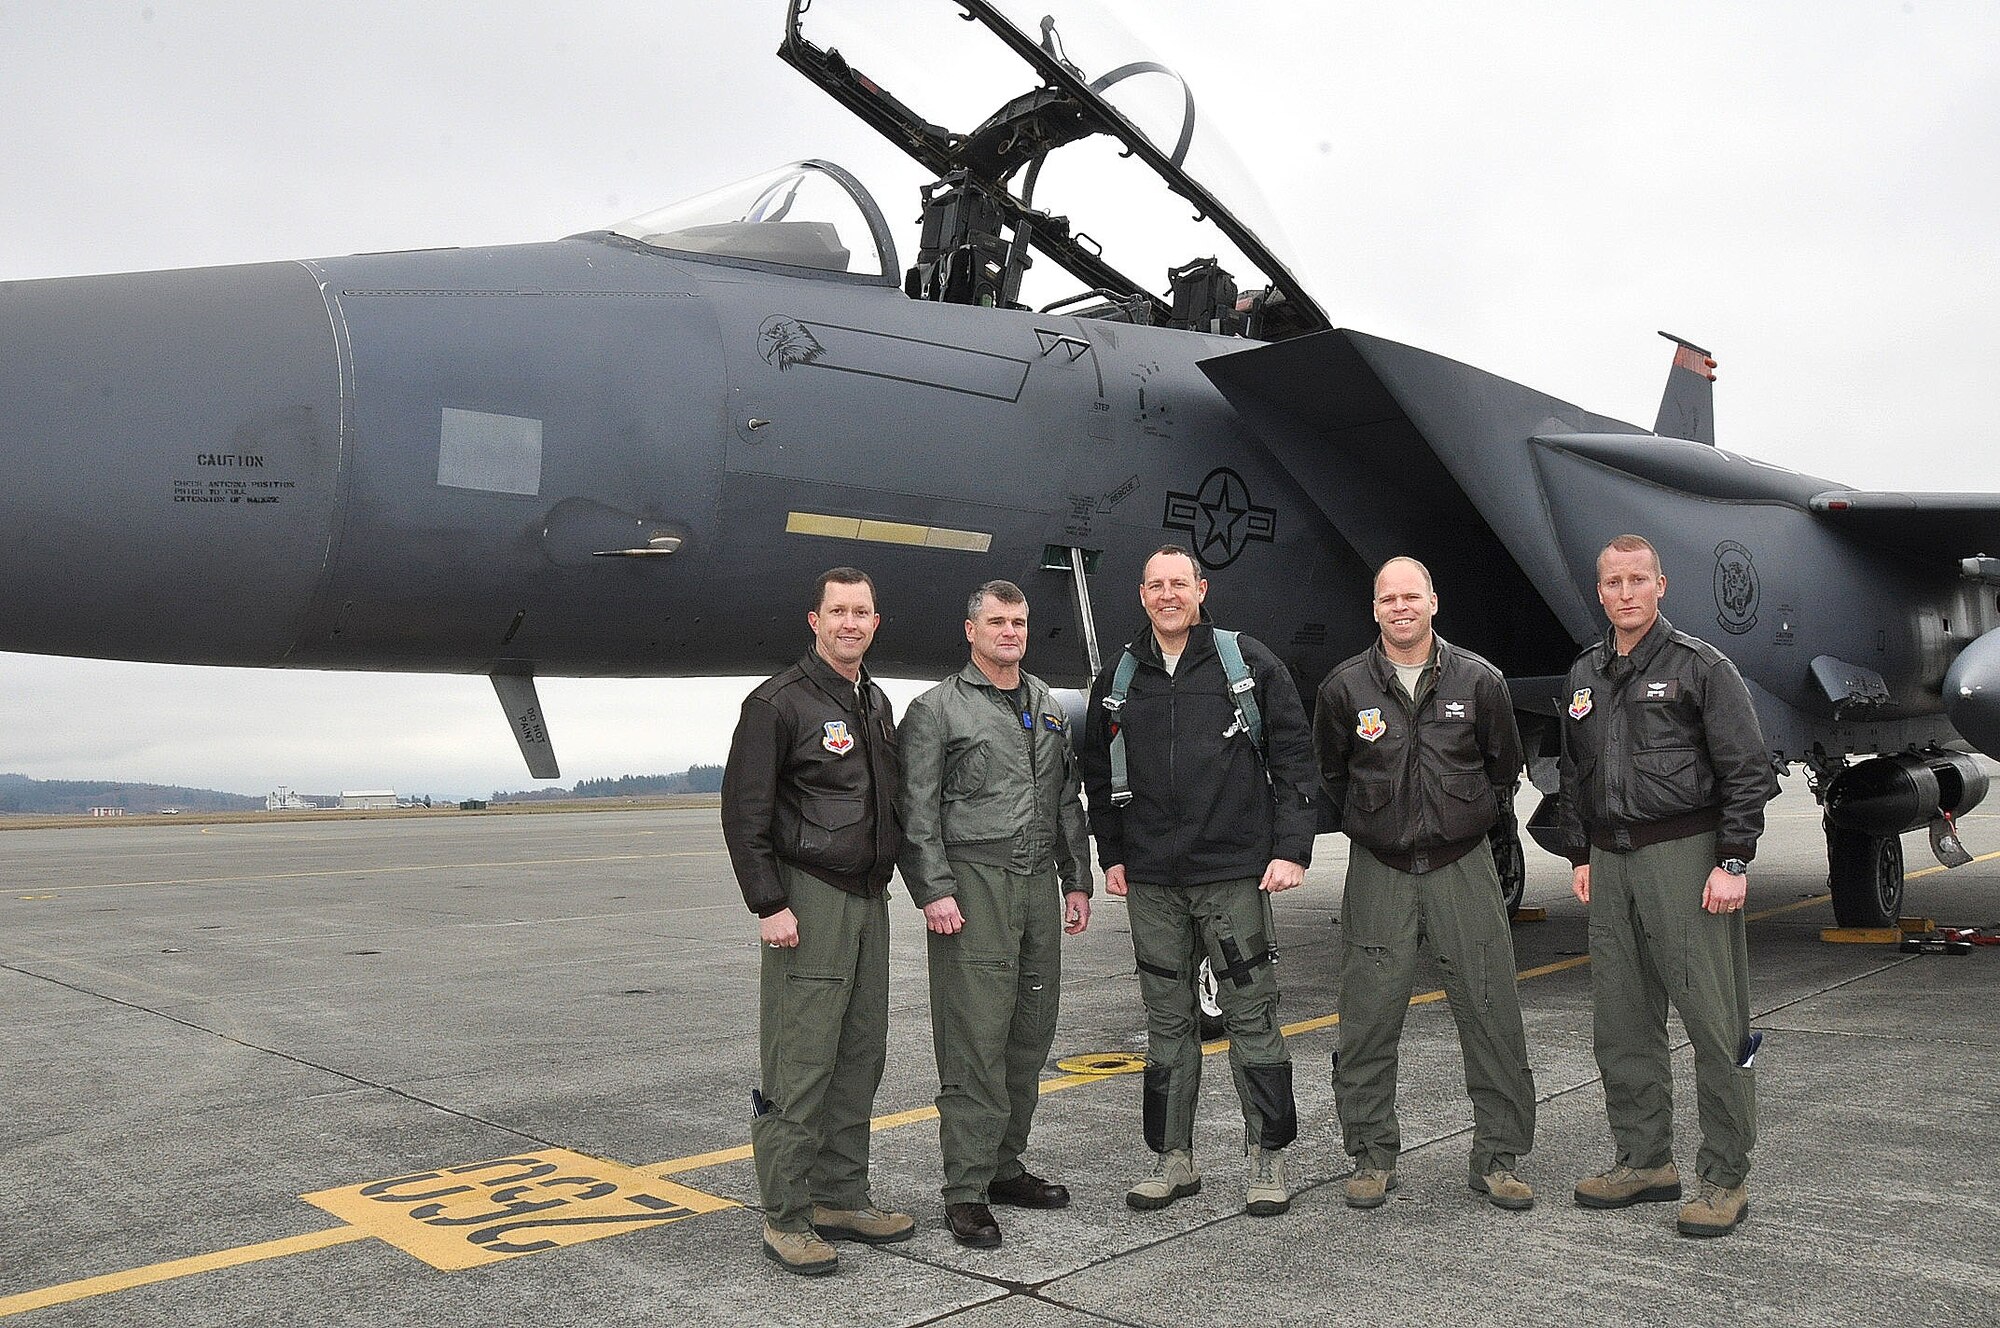 An F-15E “Strike Eagle” from Mountain Home Air Force Base, Idaho, arrives Jan. 14 to NAS Whidbey Island with U.S. Air Force Col. Christopher Short (center), Commander, 366th Fighter Wing, aboard to visit the 390th Electronic Combat Squadron. He is met by Col. Christopher Sage, 366th Operations Group Commander (far left); Capt. Jay Johnston, NAS Whidbey Island Commanding Officer; Lt. Col. Karl Fischbach, 390th ECS Commander; Lt. Col.  Don Keen, 390th ECS Operations Officer.  With 16 U.S. Air Force fliers assigned to NAS Whidbey Island under the Electronic Attack Wing, U.S. Pacific Fleet umbrella, Short came for an annual squadron status visit and get a “Growler ride” in a simulator. (Tony Popp photo)